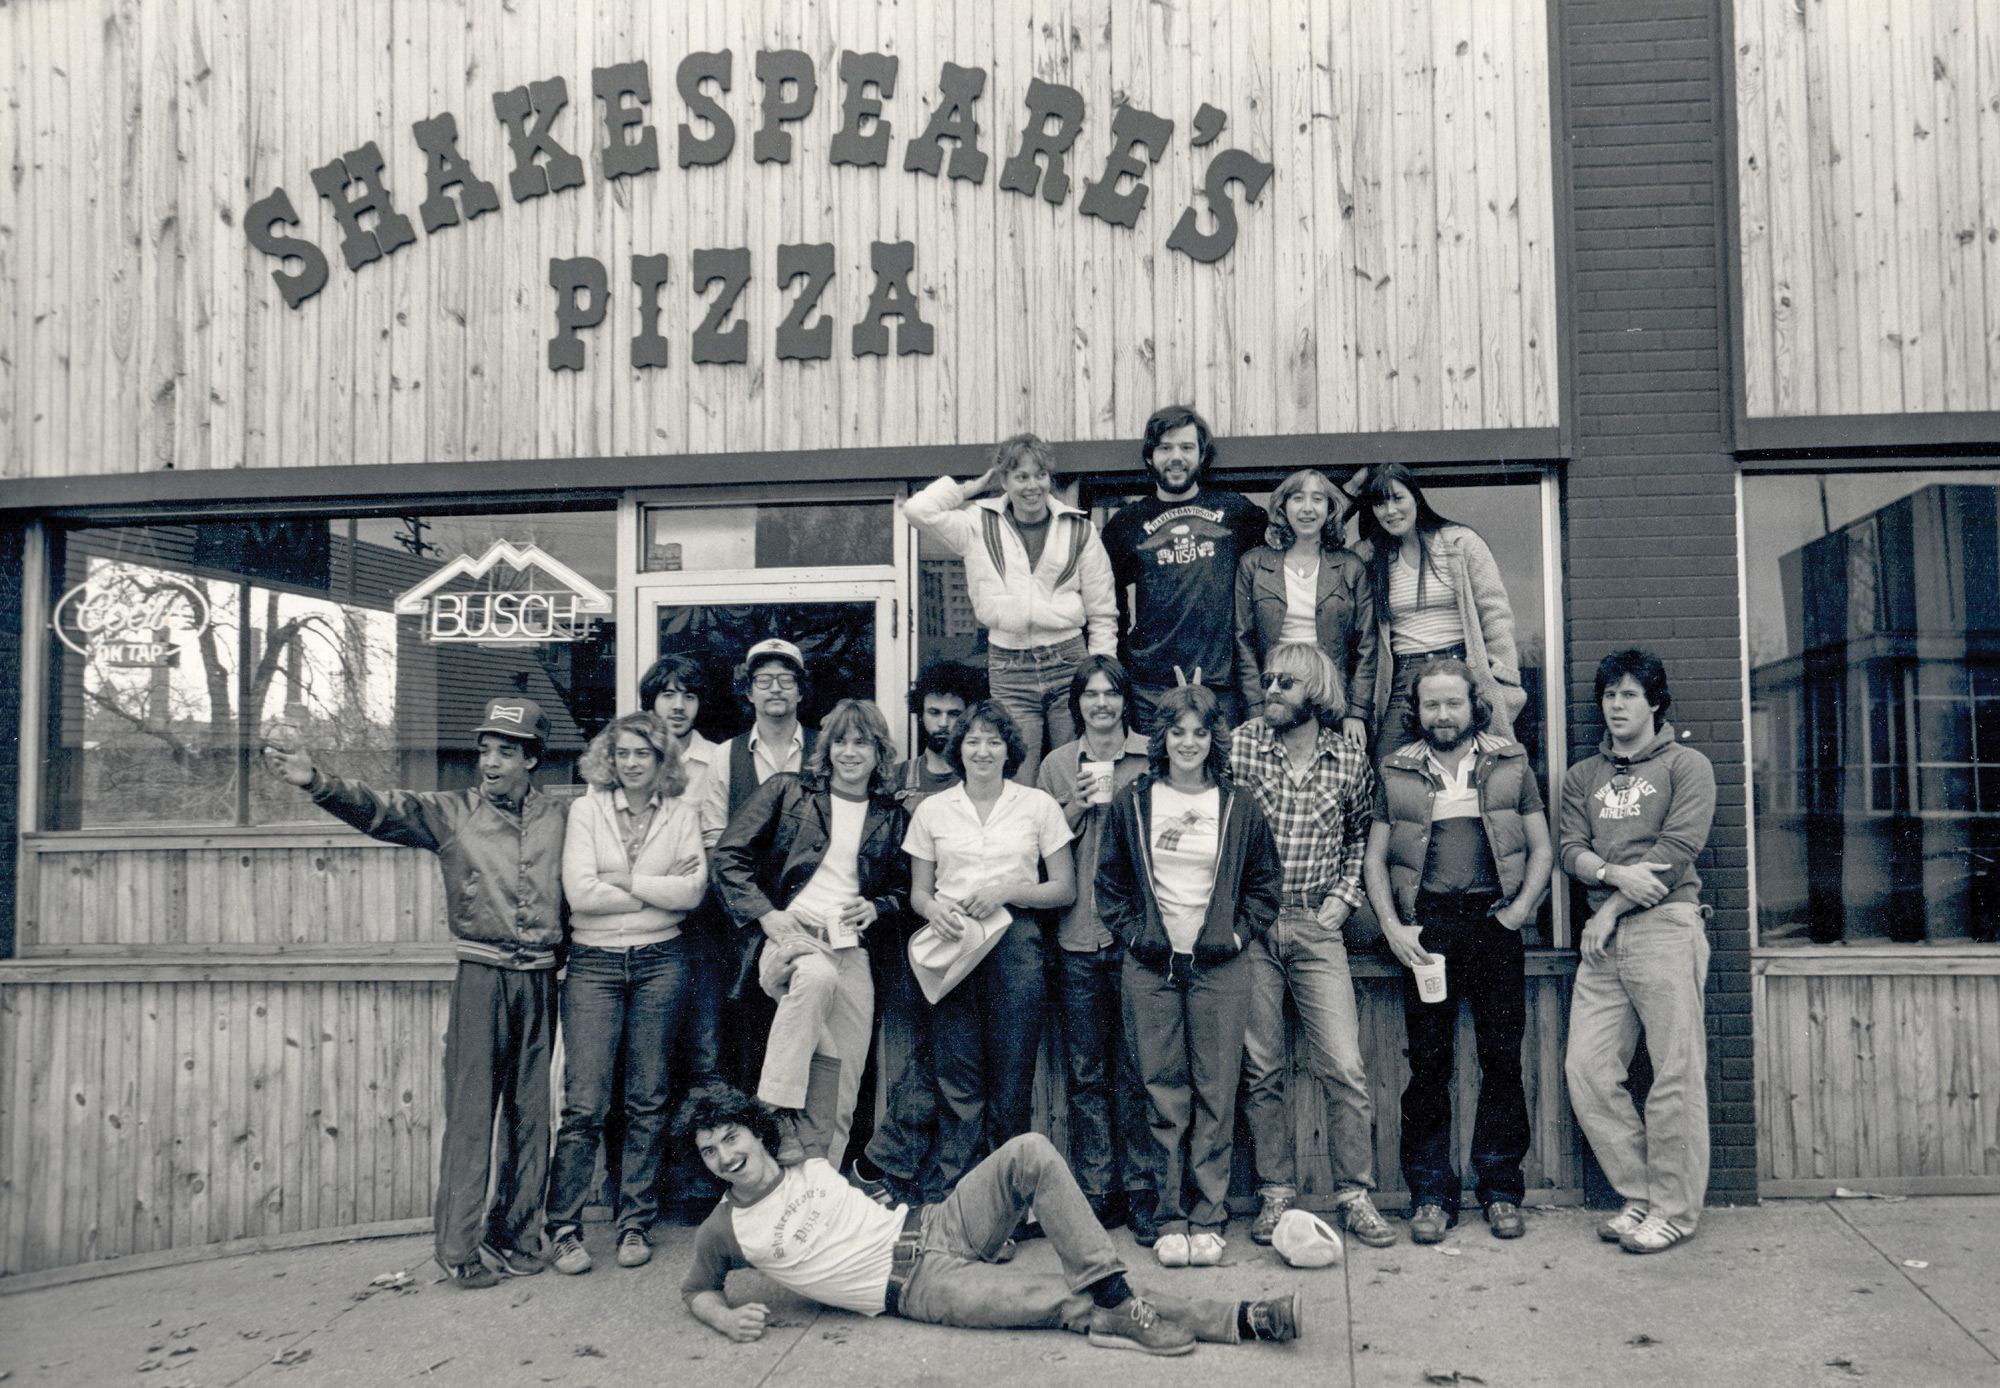 group photo of pizza workers